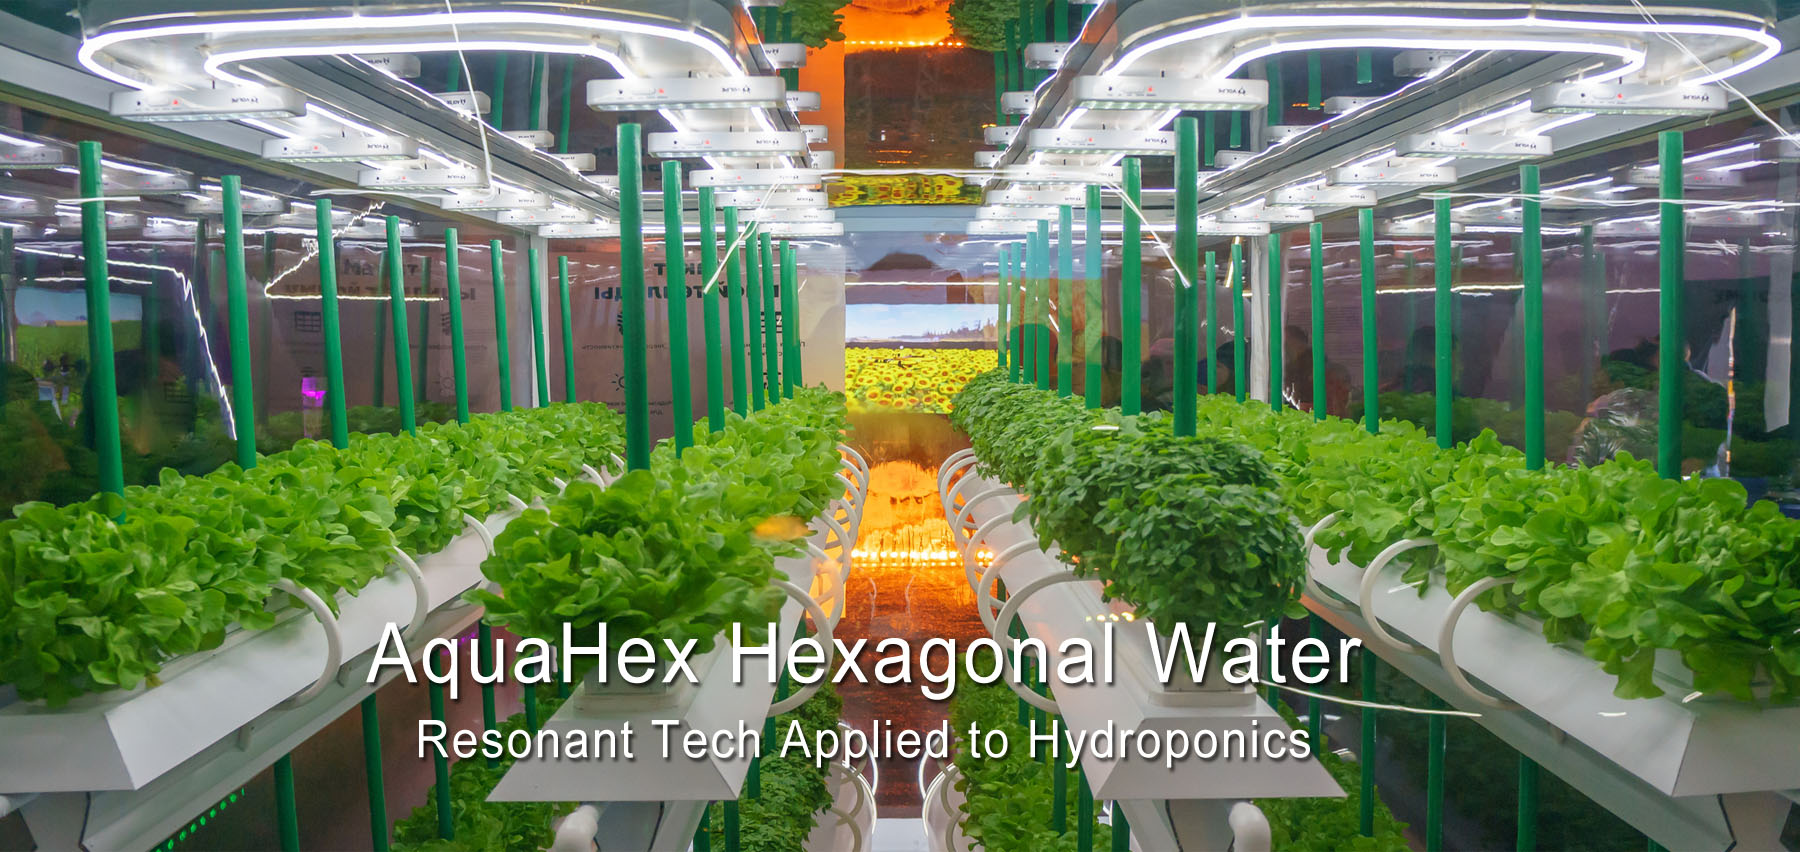 AquaHex hexagonal water for hydropoinic